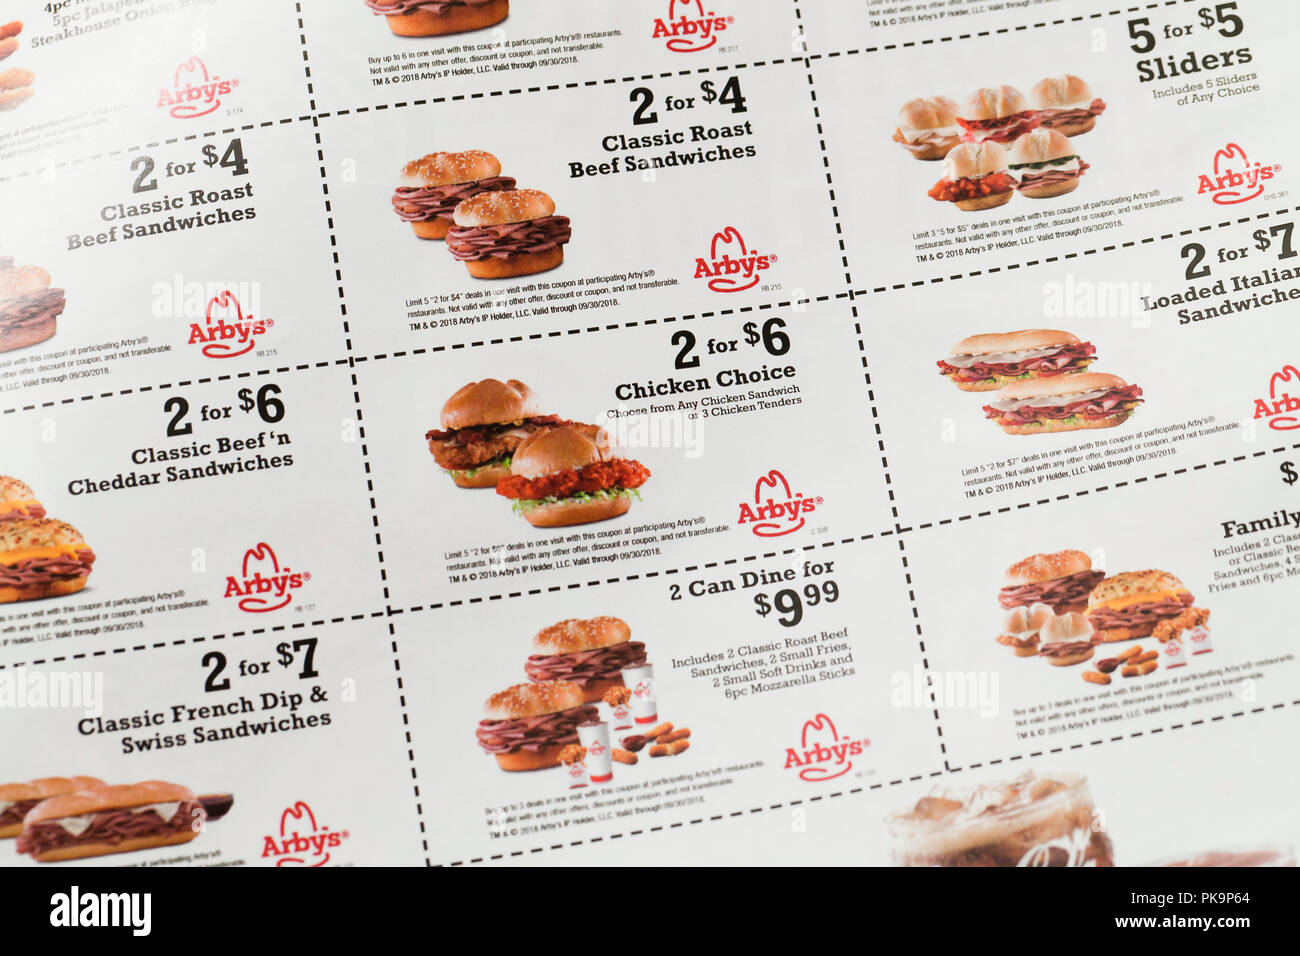 Arby S Sandwich Coupons Fast Food Coupon Usa Stock Photo Alamy